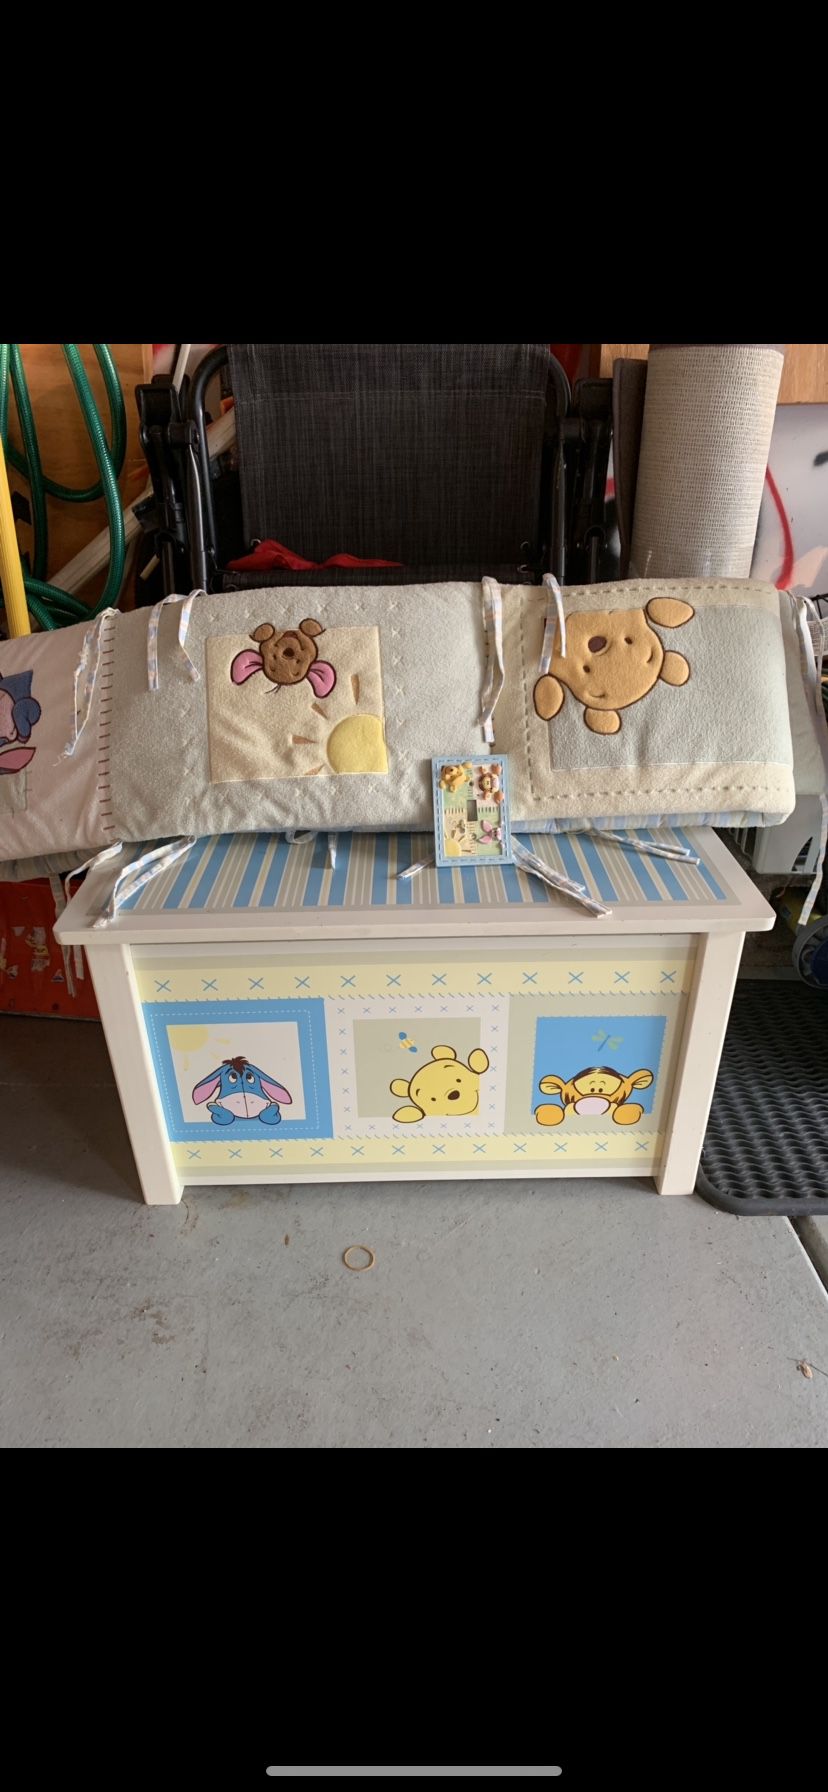 Winnie the Pooh Baby/kids toy chest and crib bumper